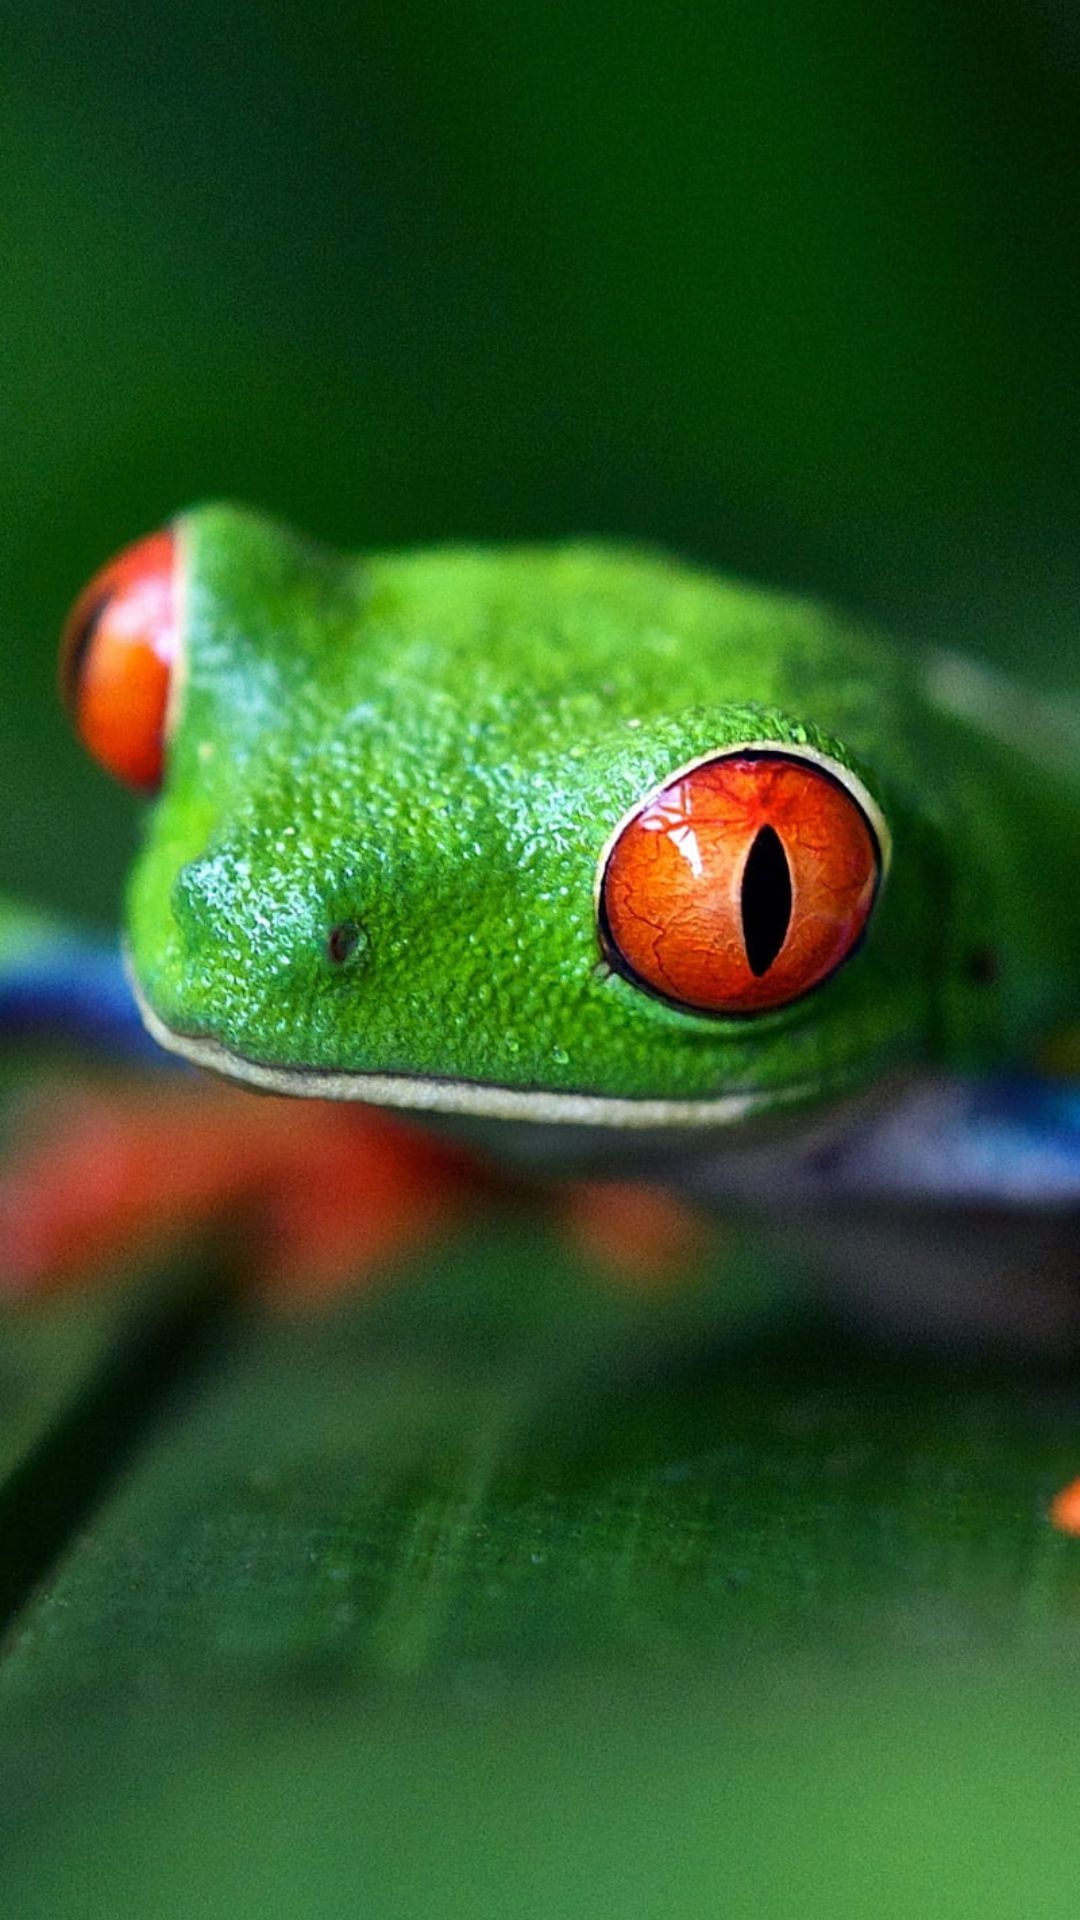 Green Tree Frog, Nature's marvel, Vibrant wallpapers, Mobile backgrounds, 1080x1920 Full HD Handy